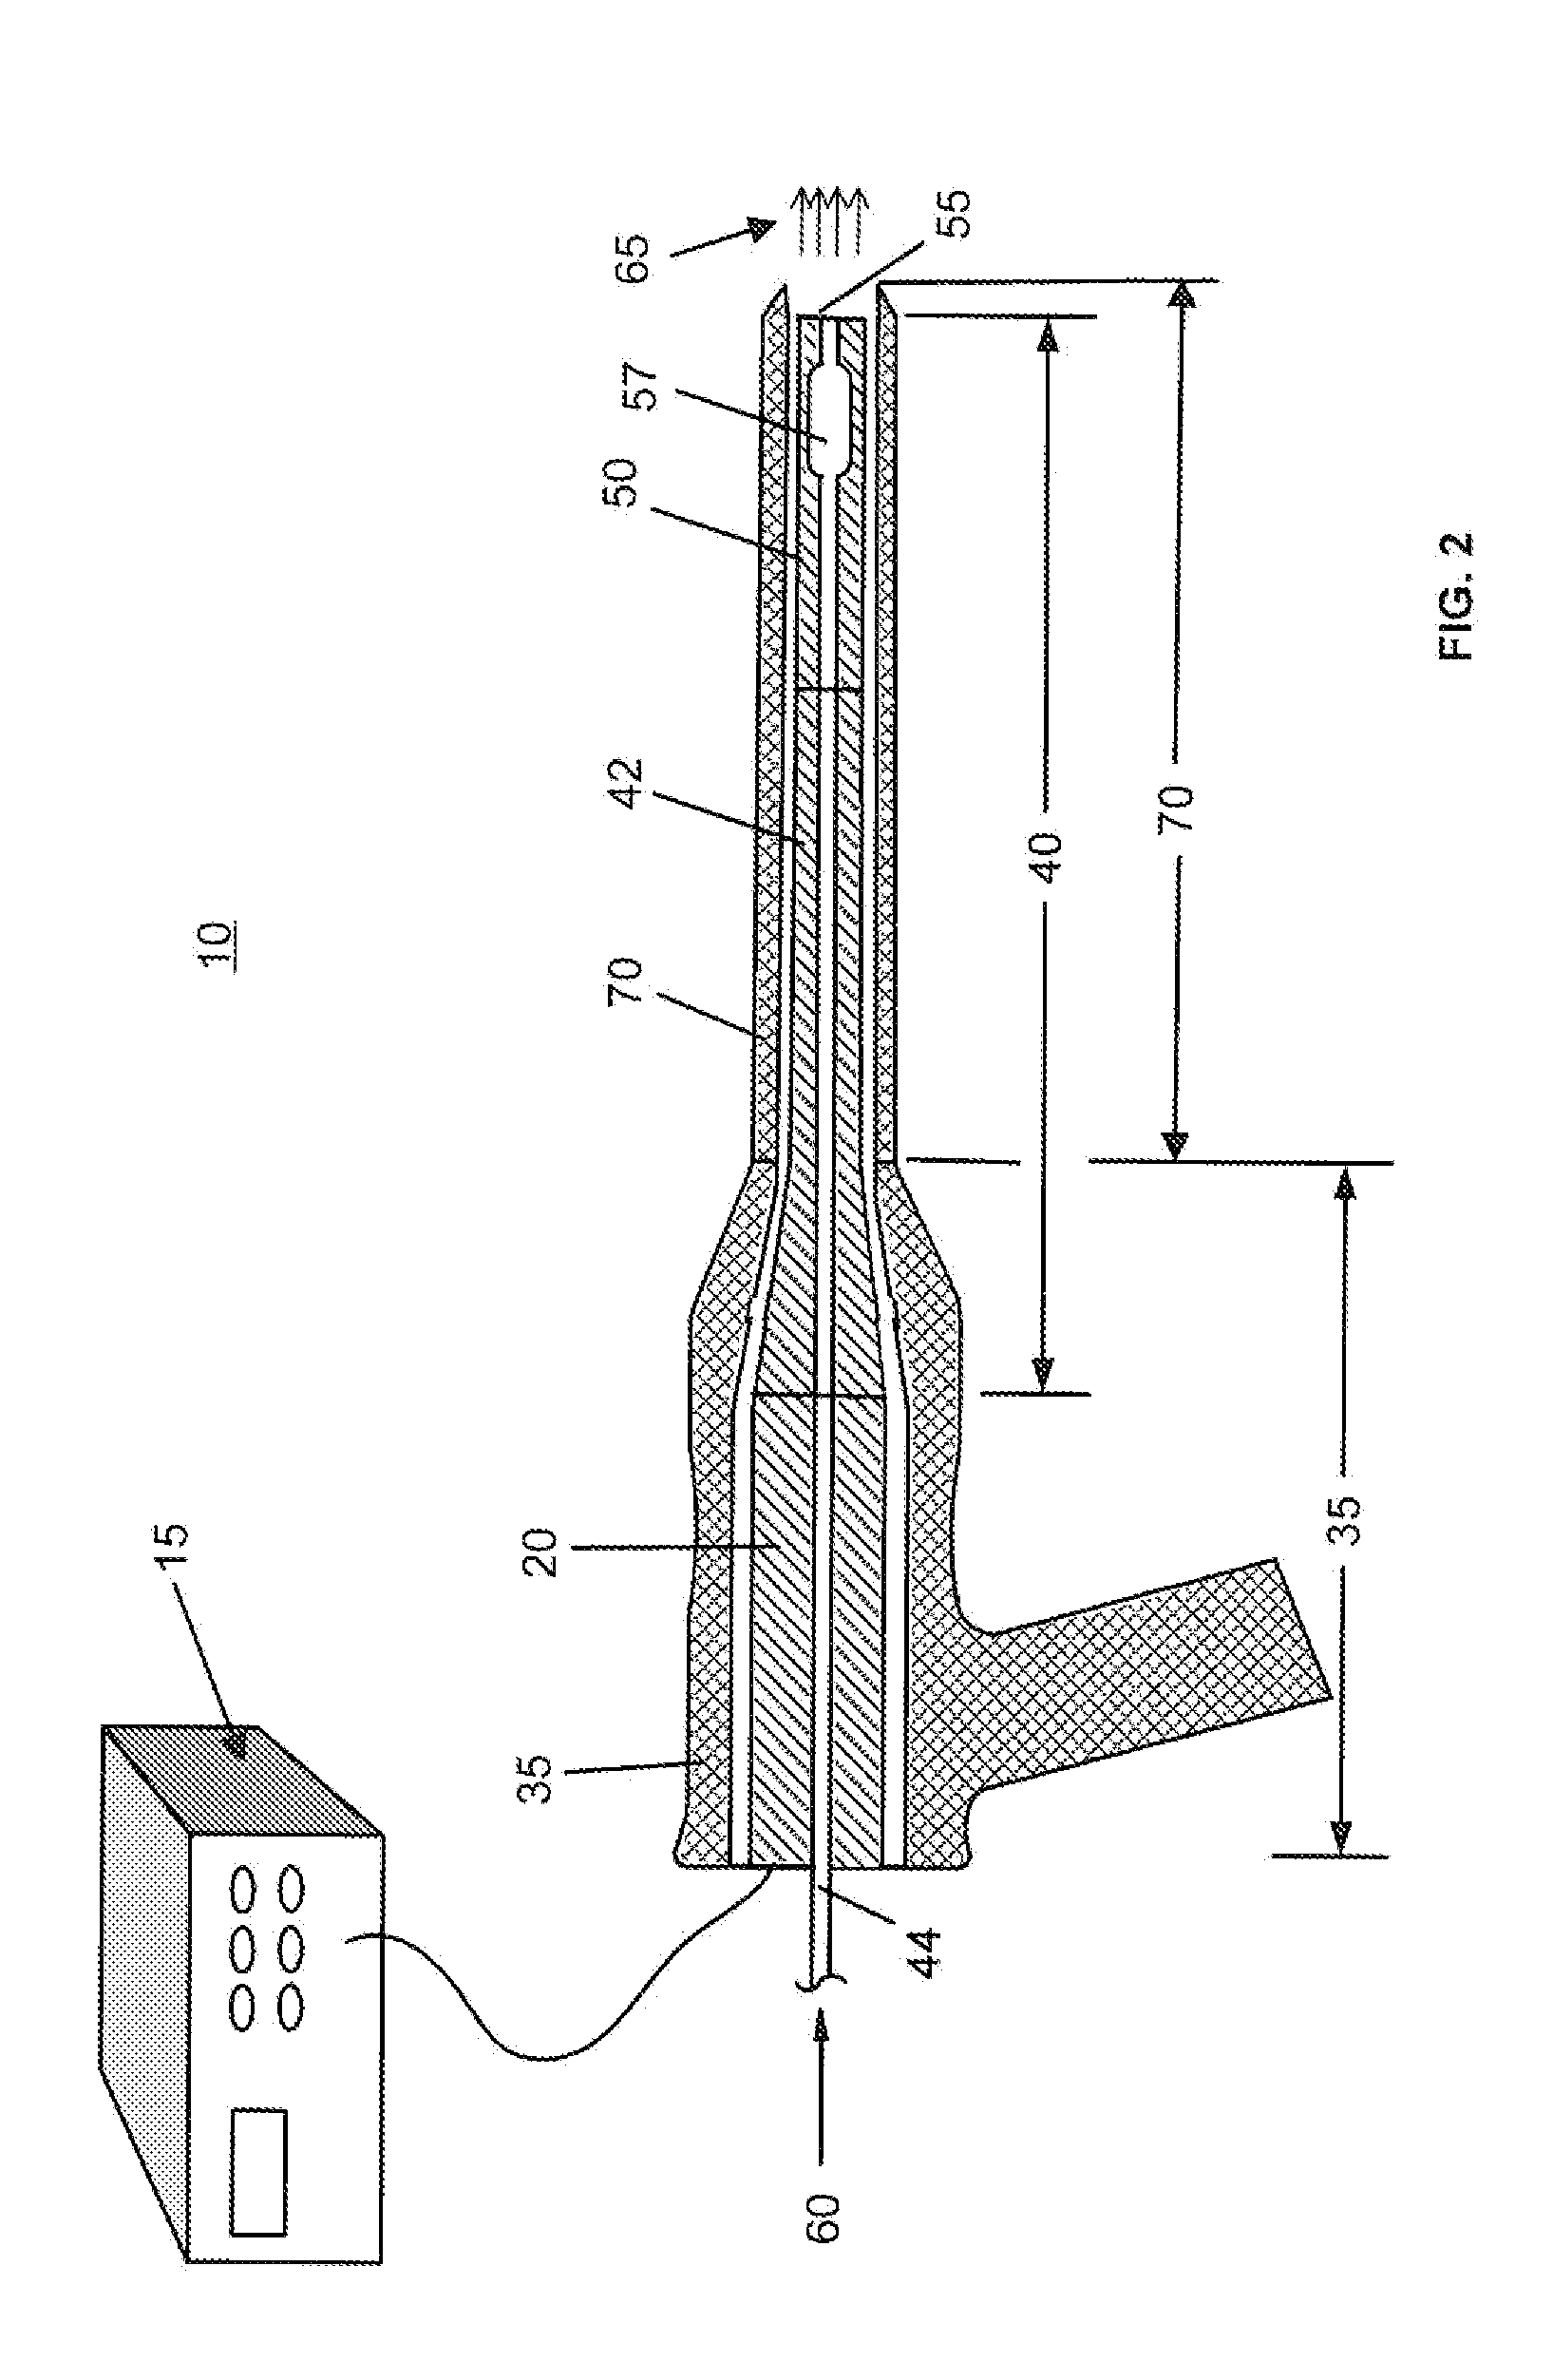 Ultrasound apparatus and methods for mitigation of neurological damage